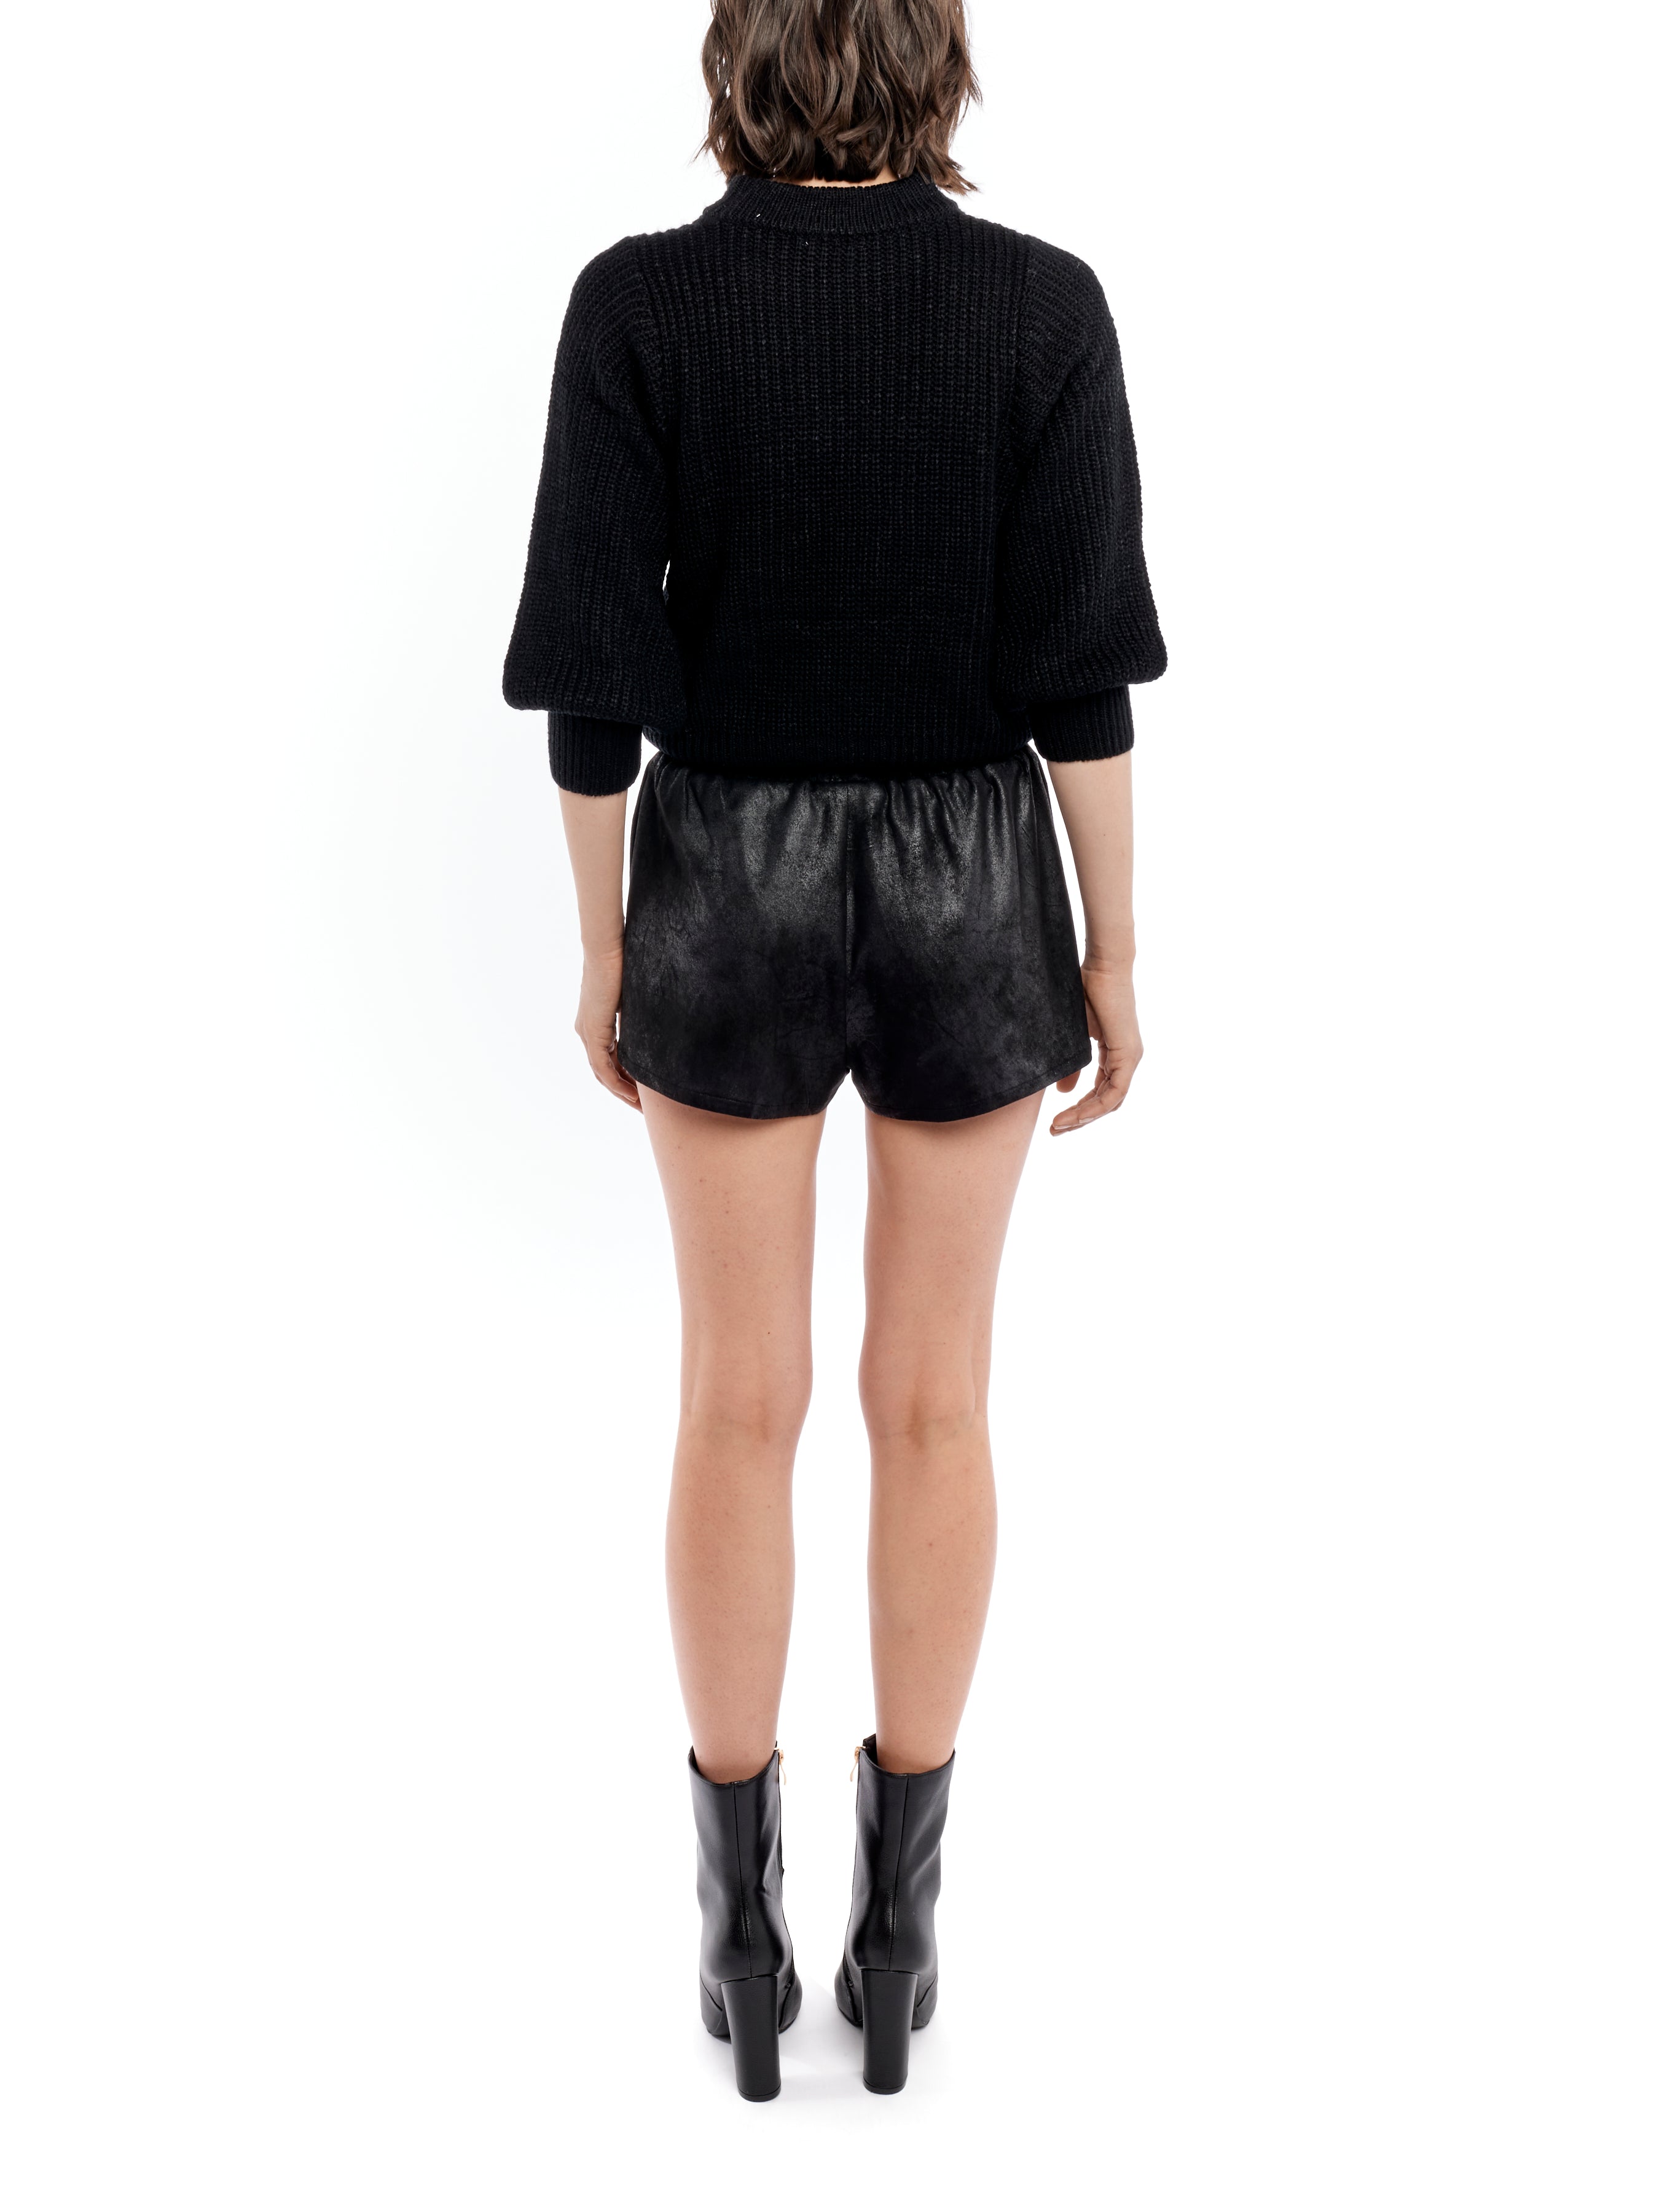 Black mid-rise shorts featuring an elasticized waist and easy, relaxed fit.